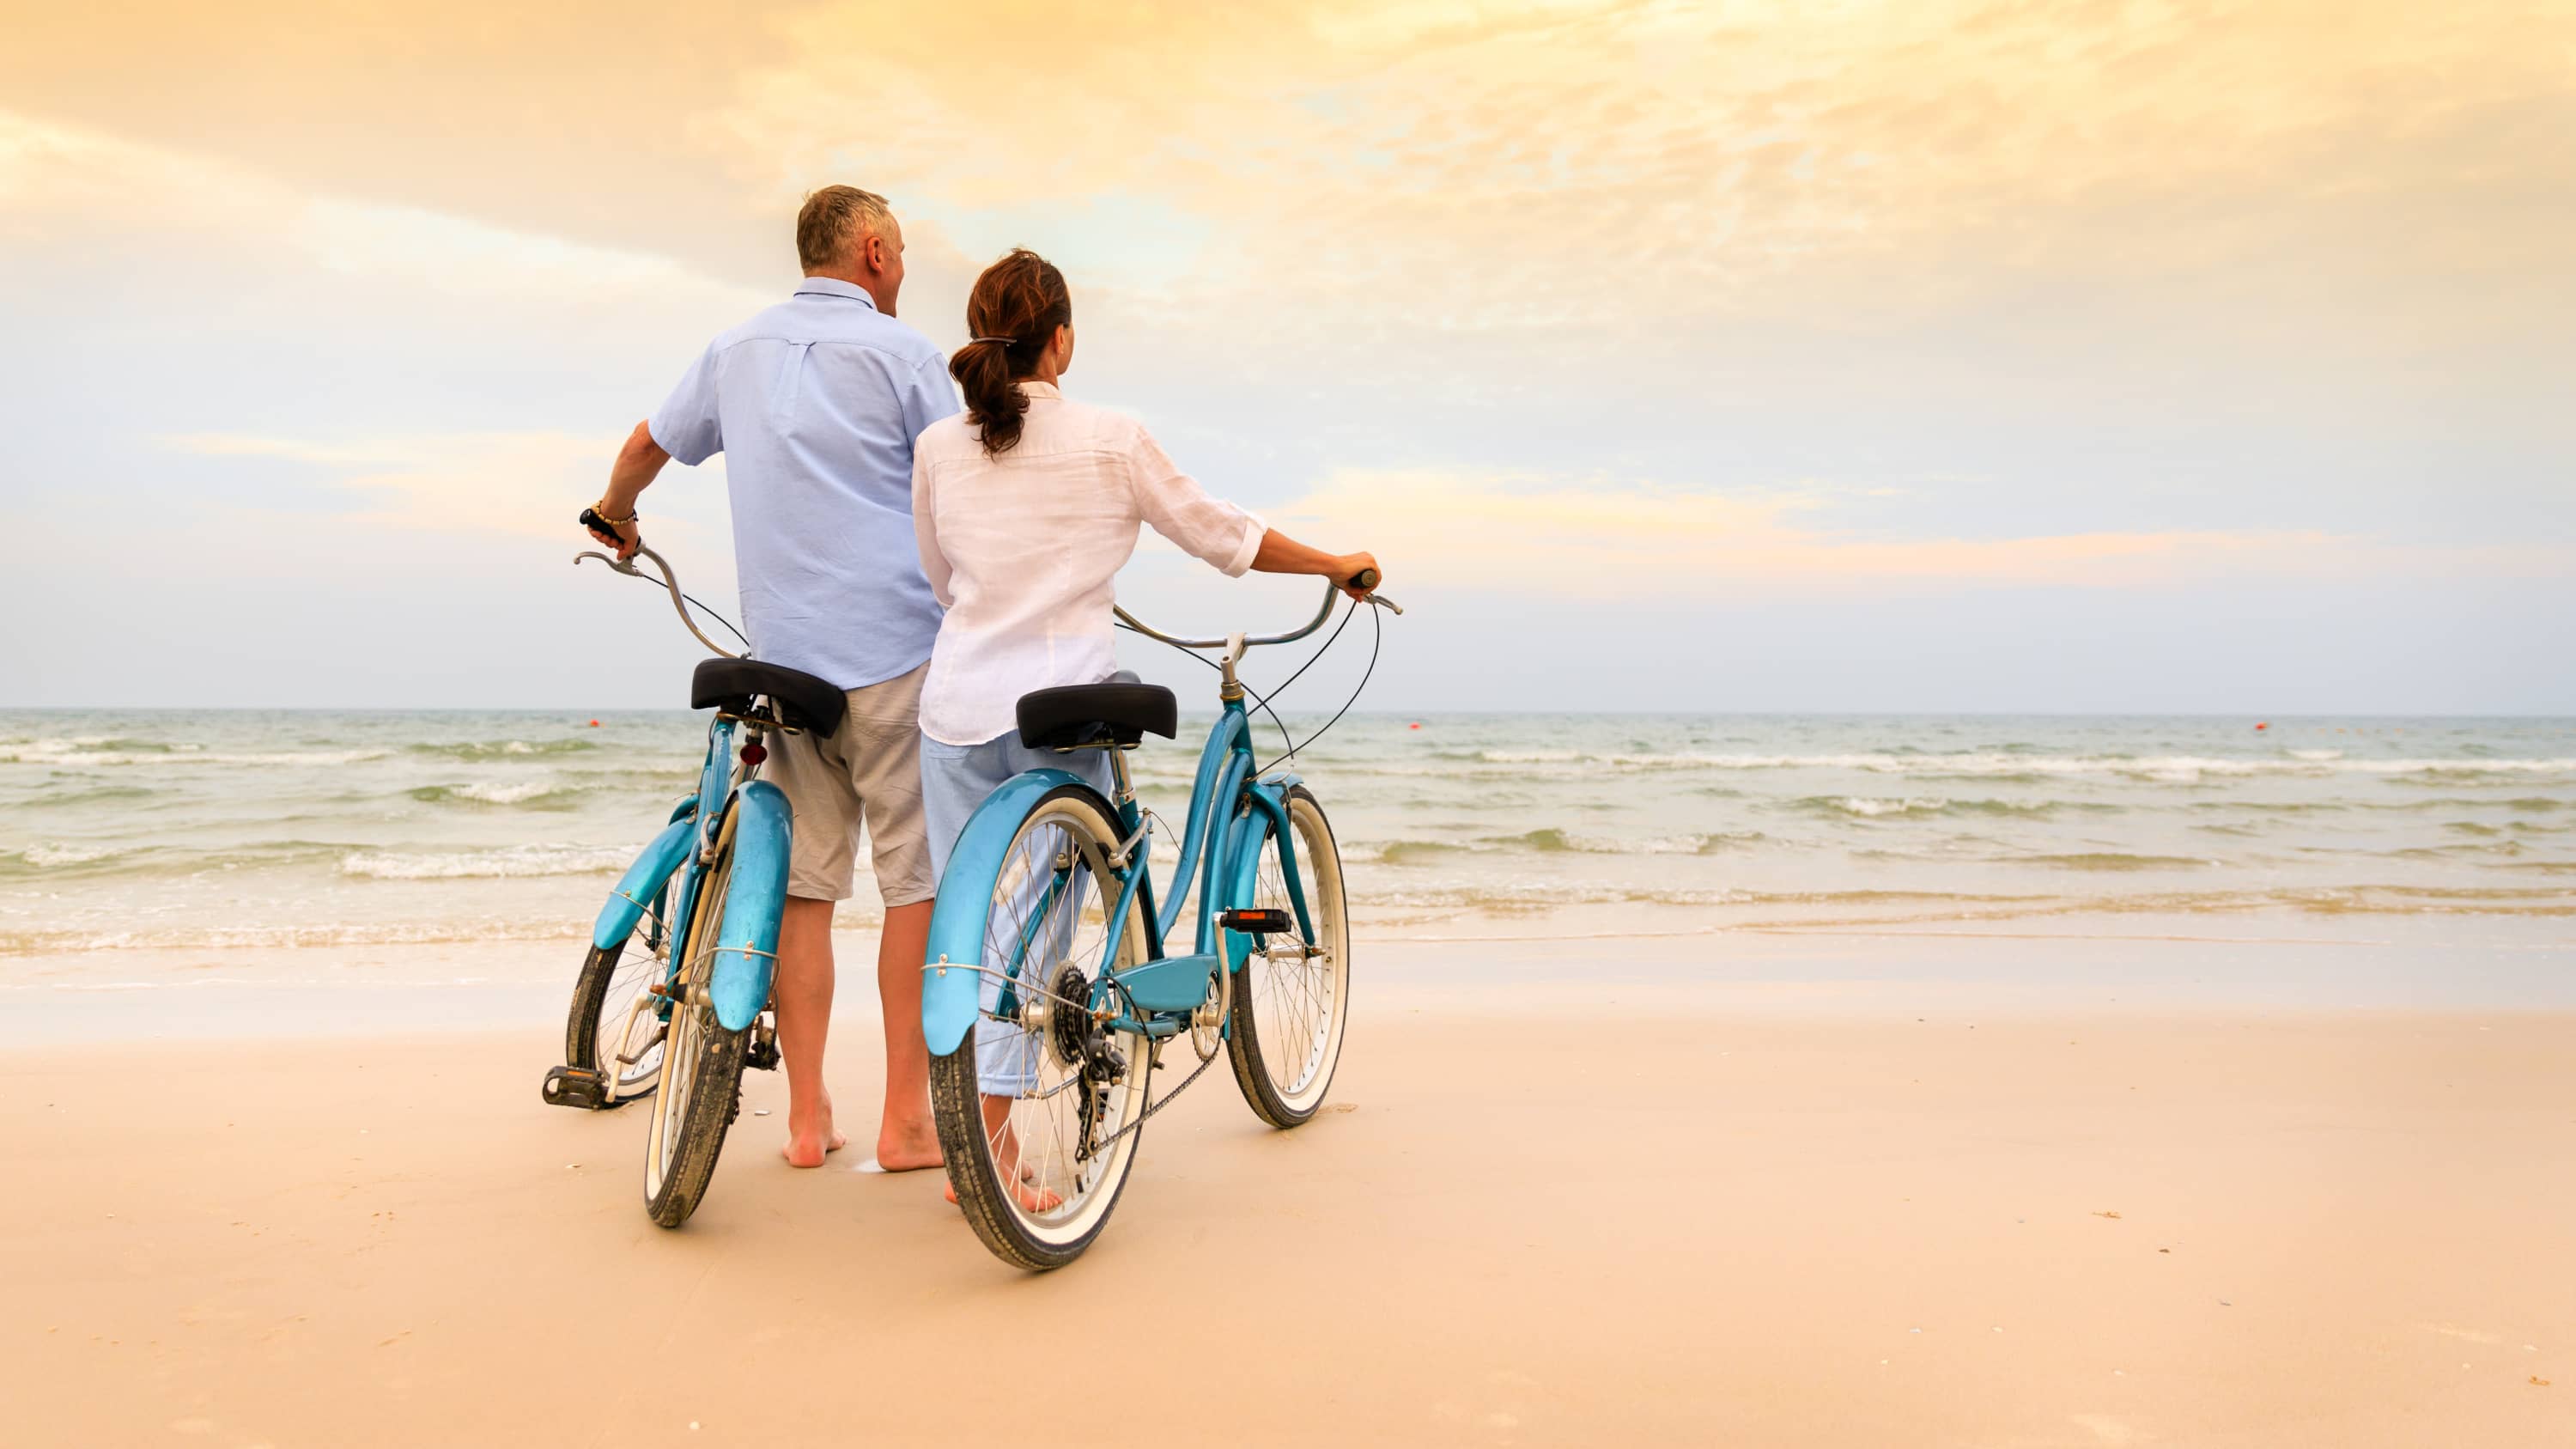 Couple on the beach with bikes, possibly after undergoing TAVR surgery